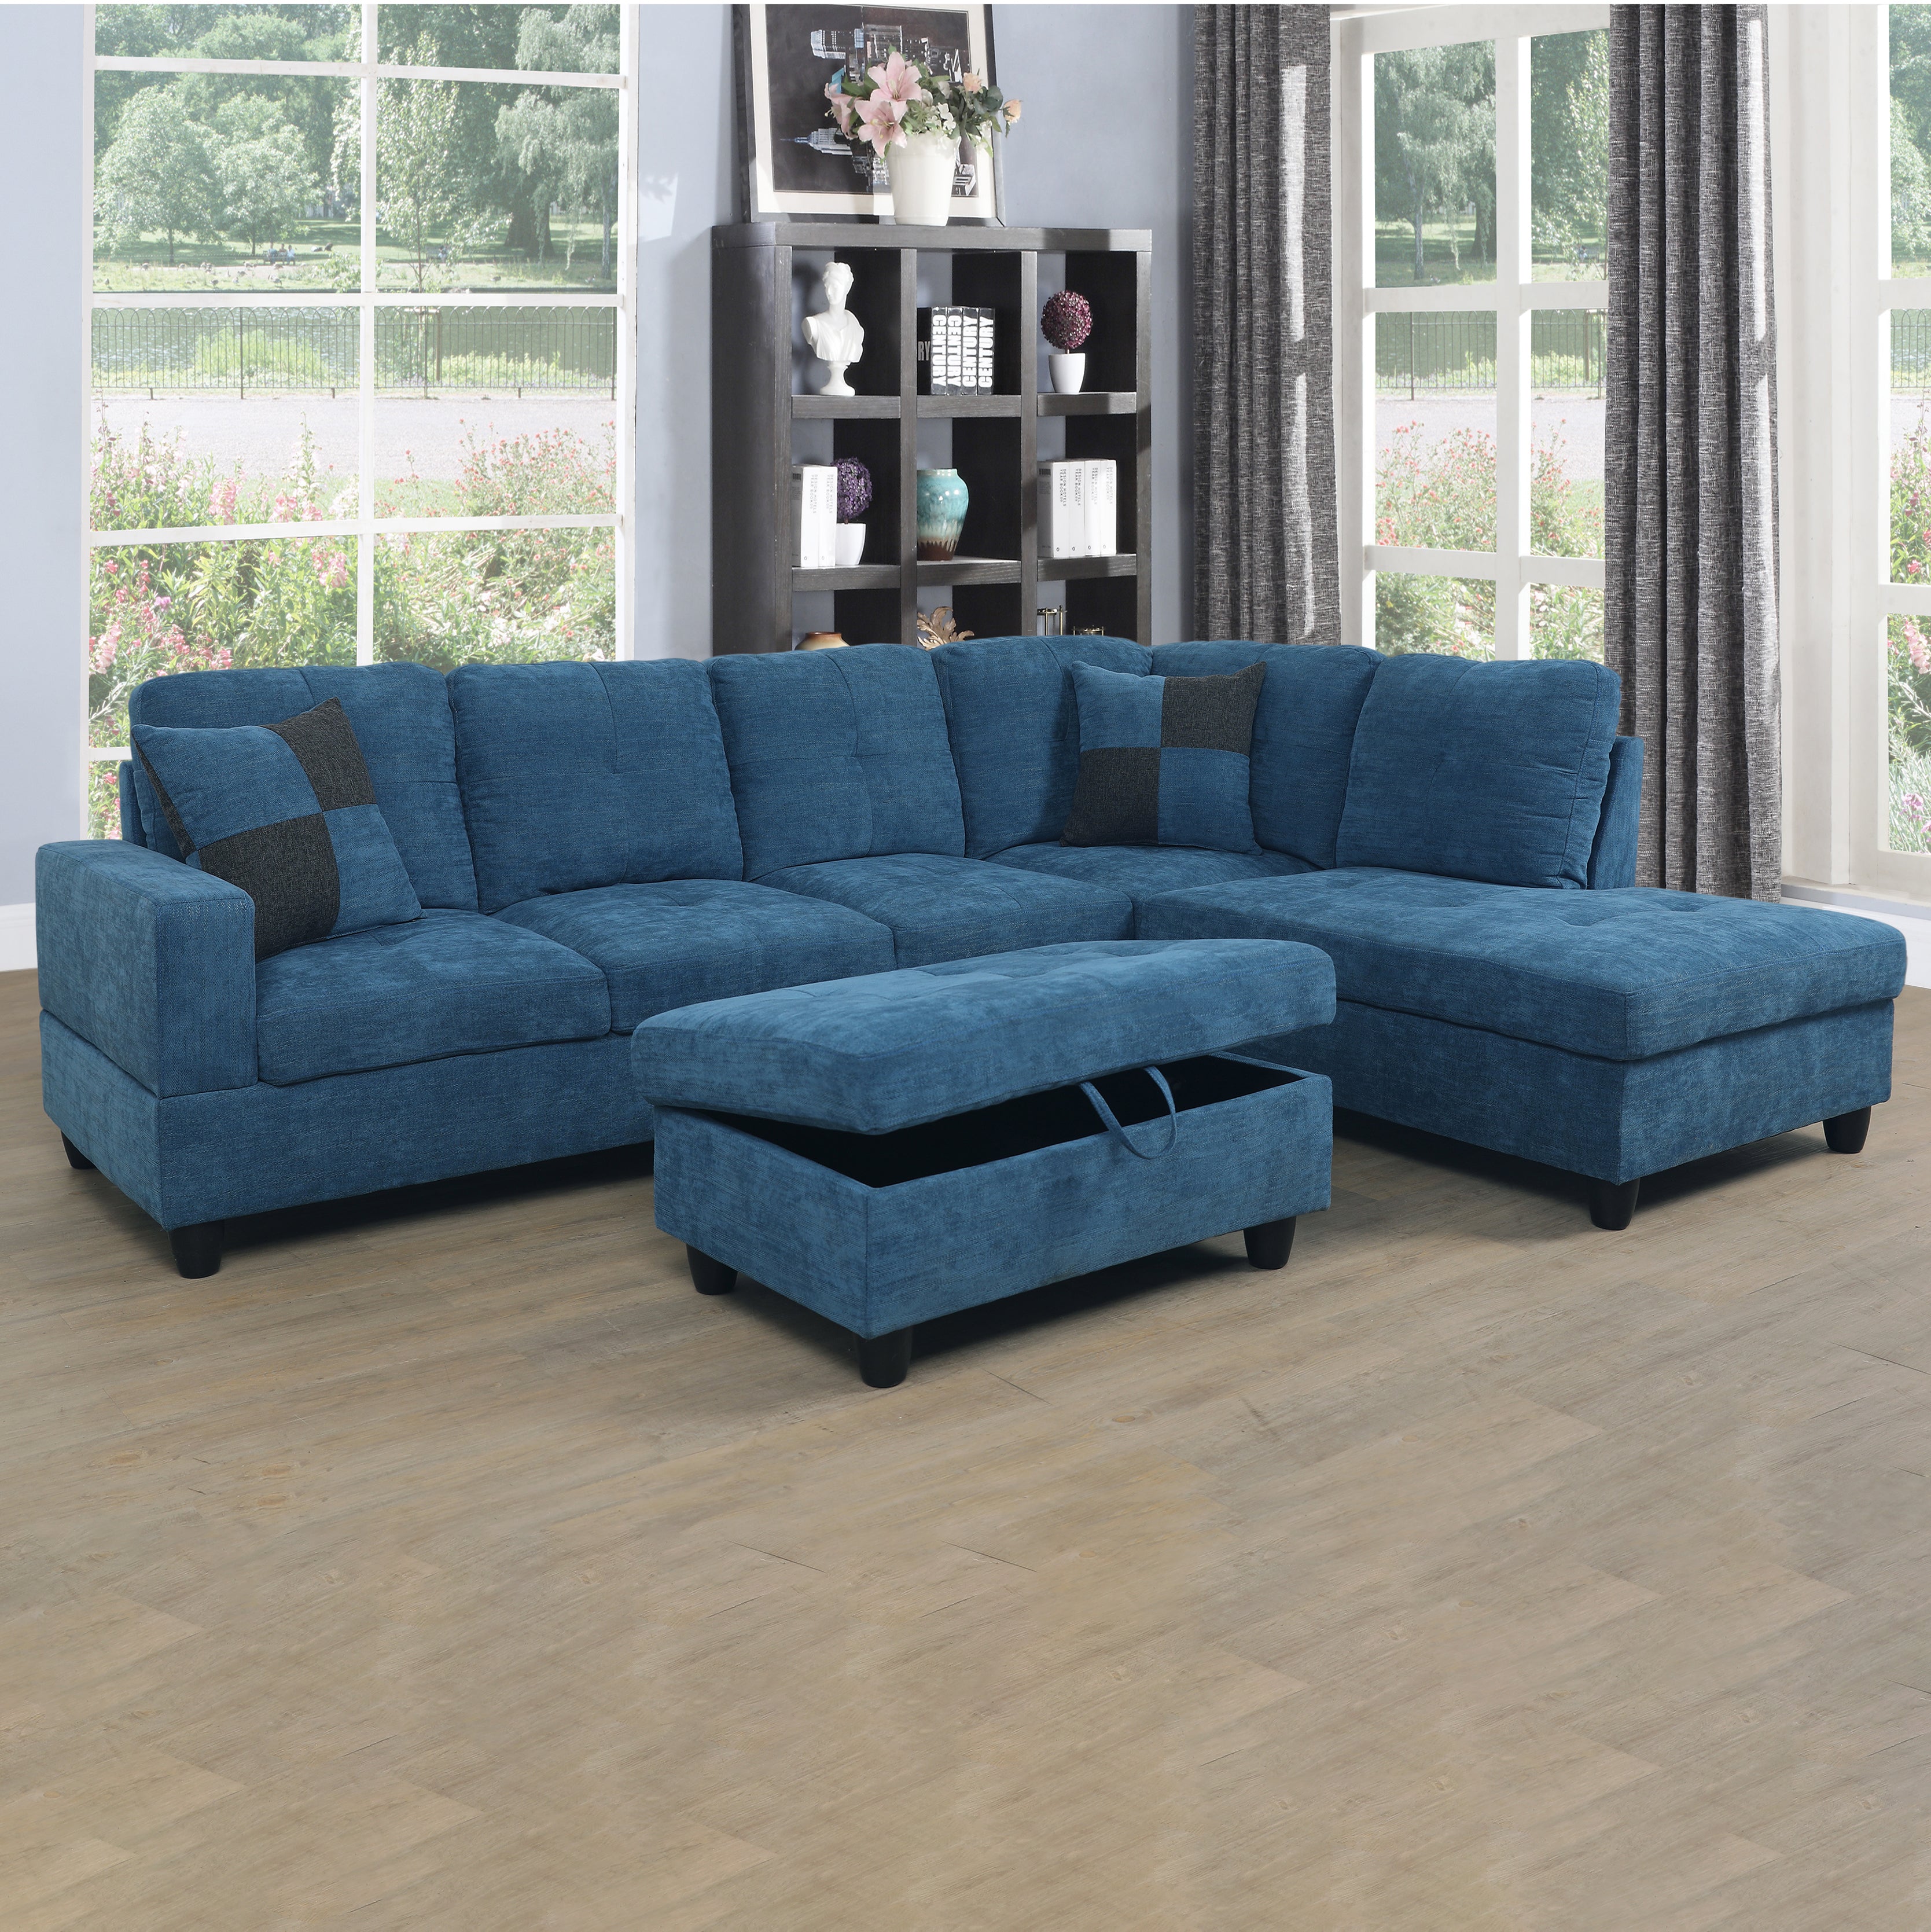 Ainehome Blue Flannel 3-Piece Couch Living Room Sofa Set